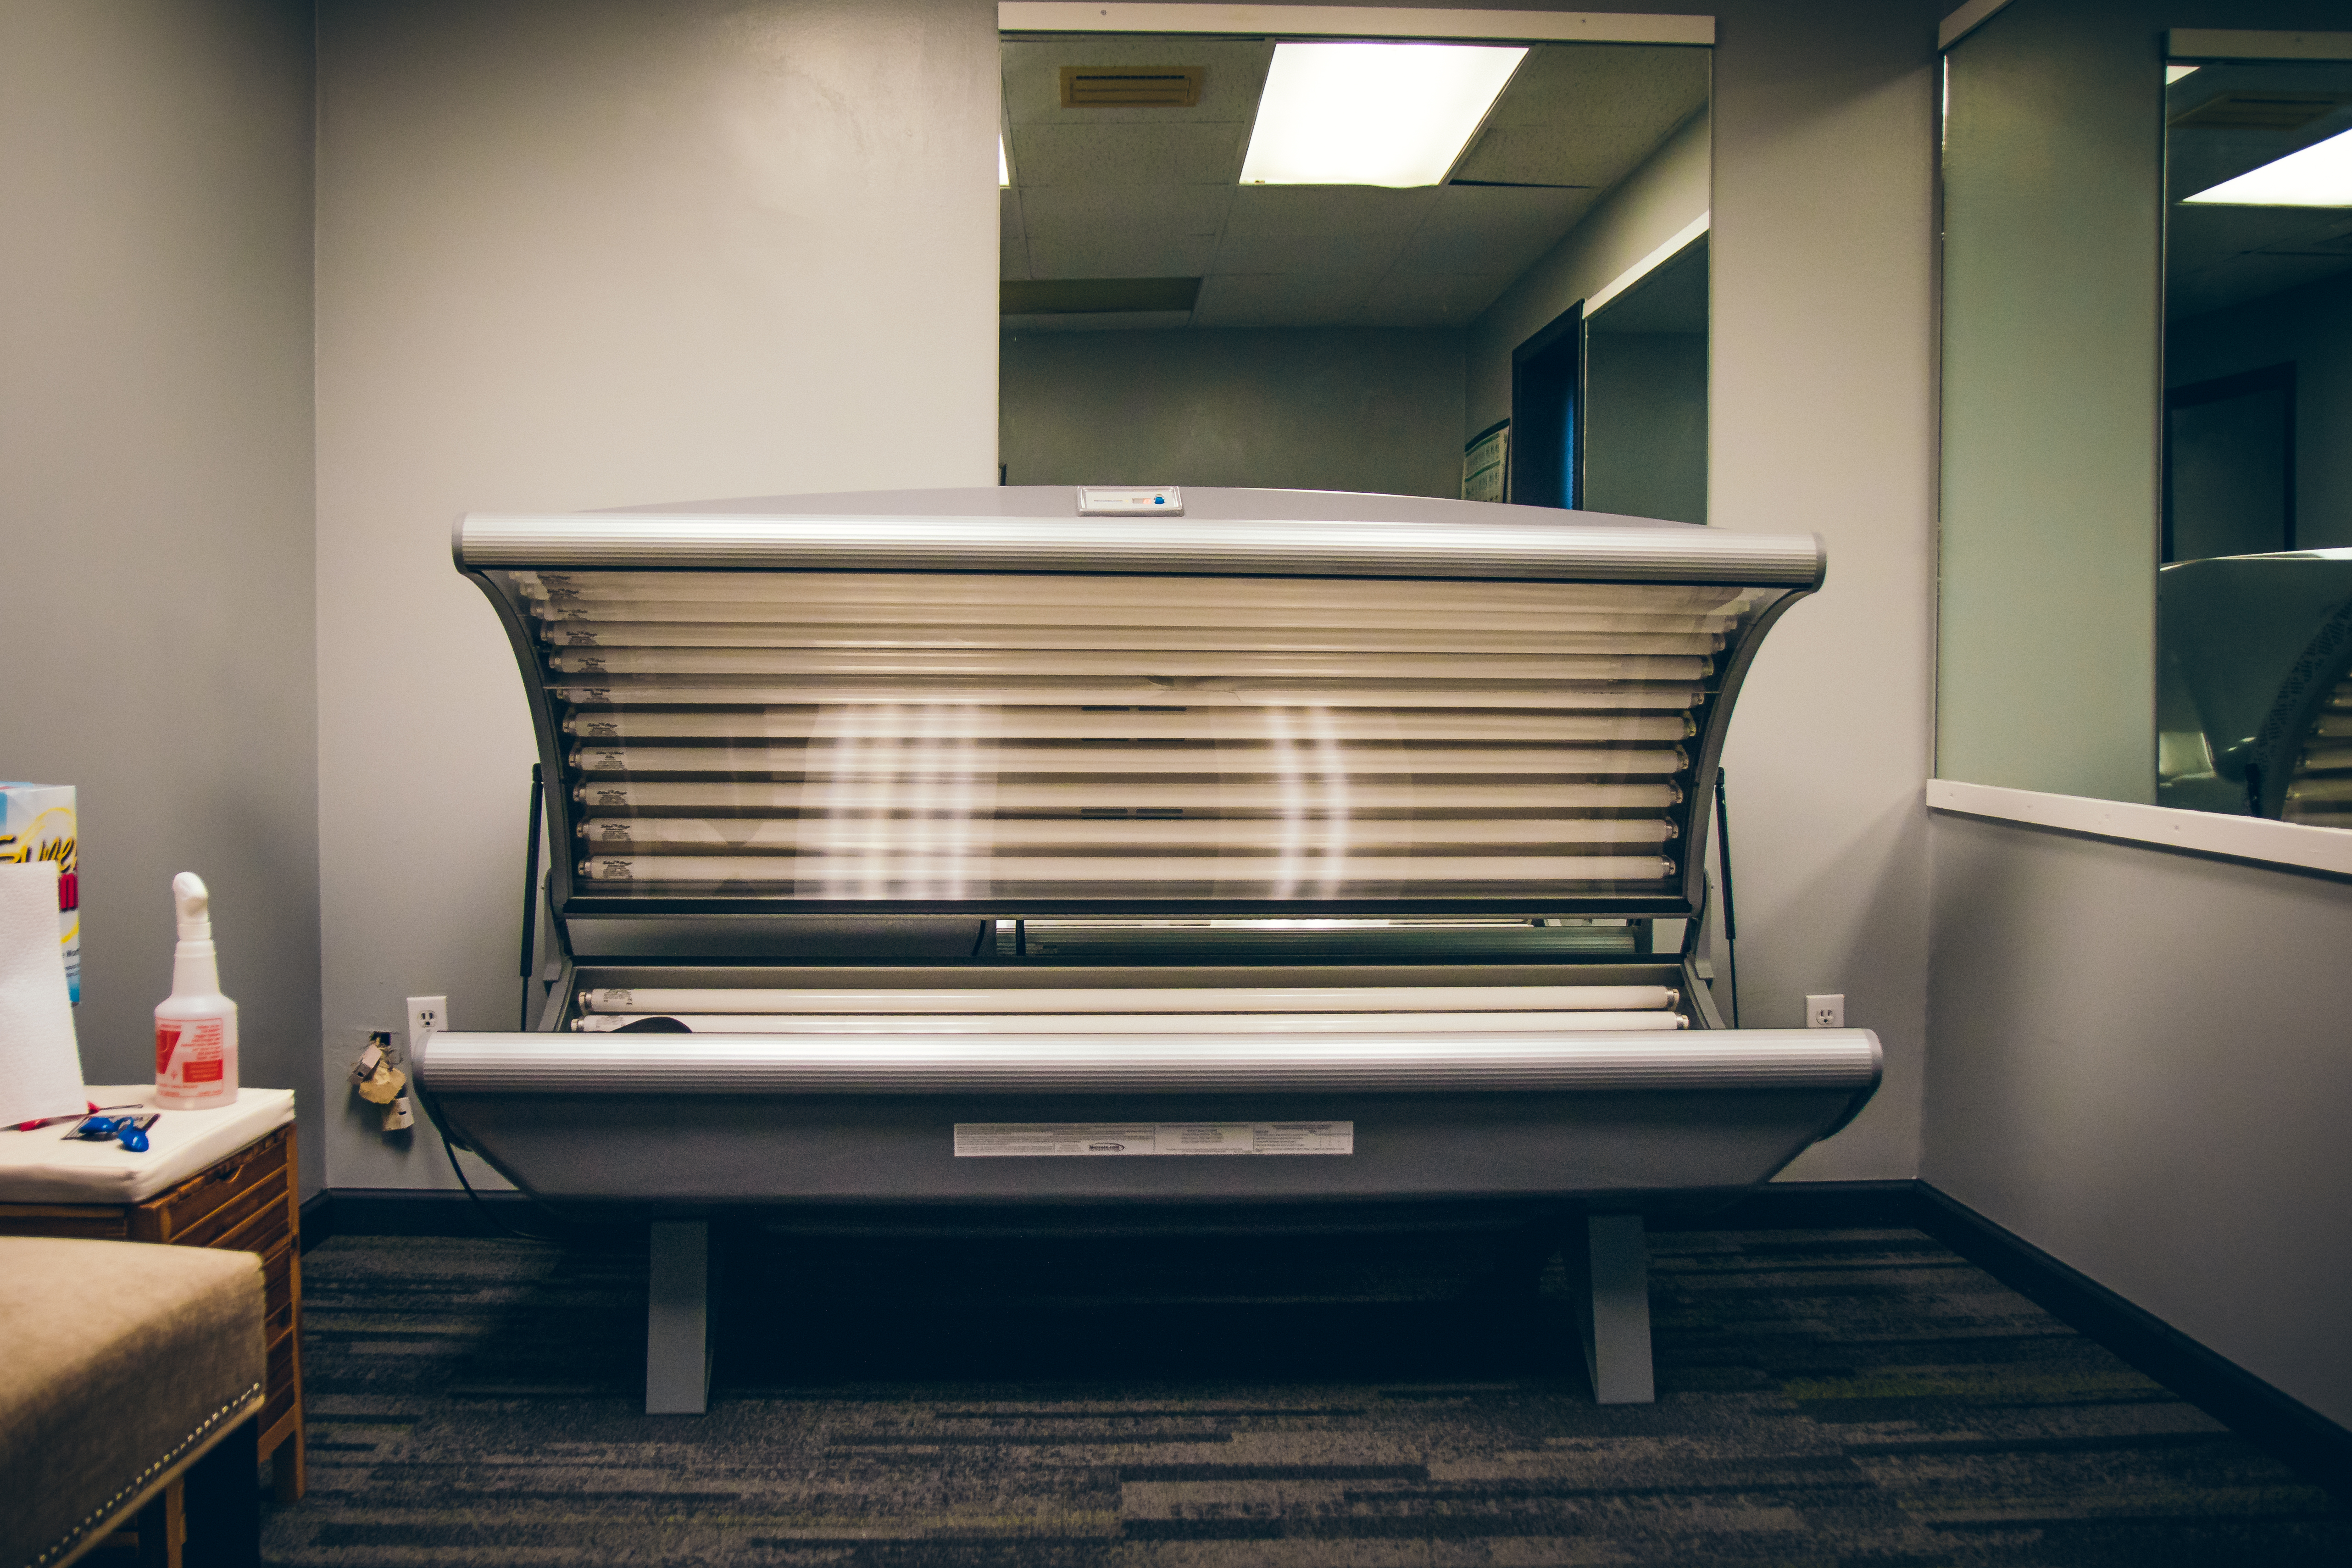 Light Bed Therapy - Turack Chiropractic in Wexford, Pa.